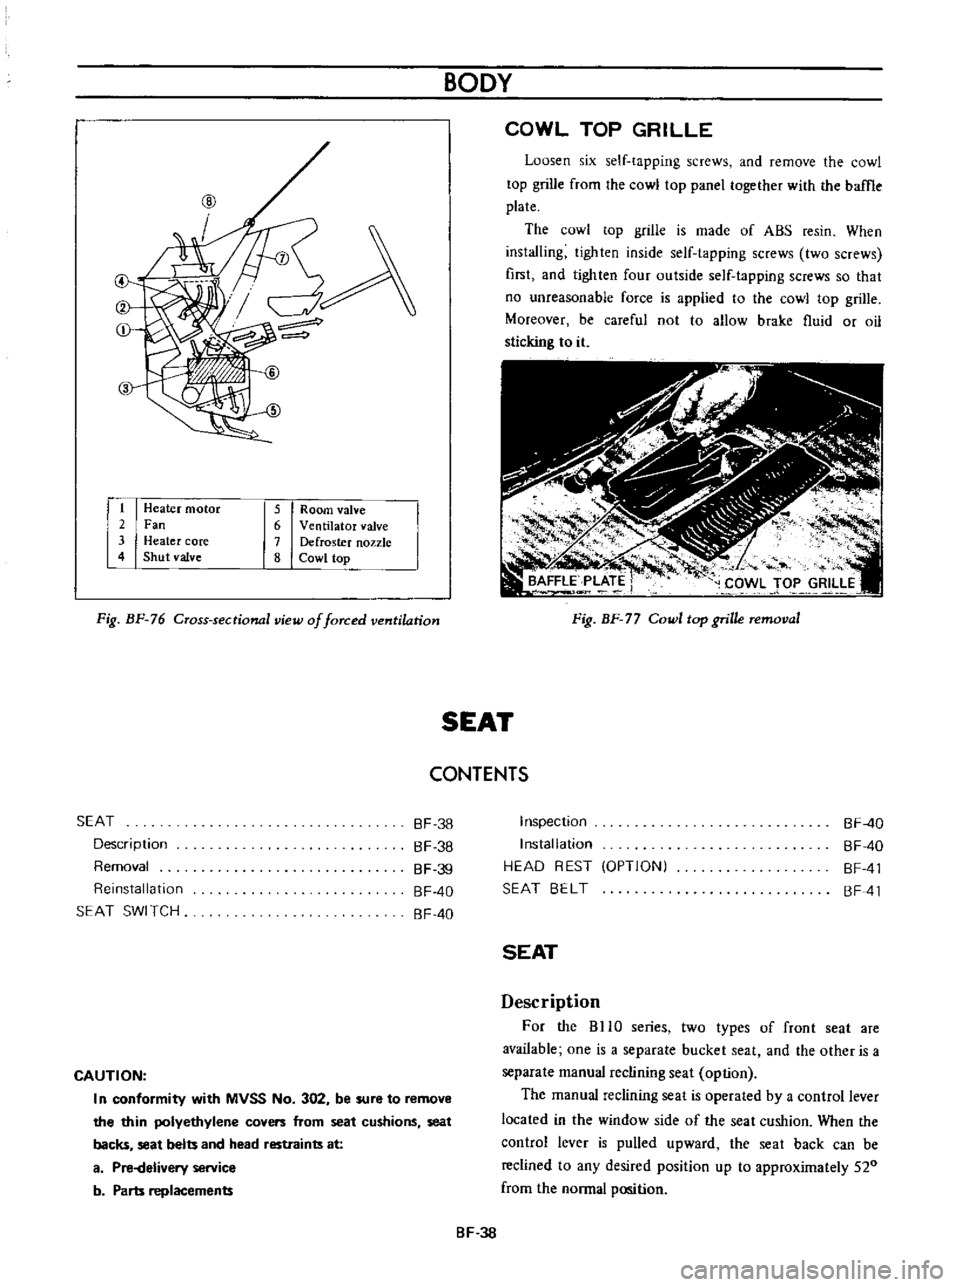 DATSUN B110 1973  Service Repair Manual 
@
c

@

CD

w

1

Heater 
motor

2

Fan

3 
Heater

core

4

Shut 
valve 
5

Room

valve

6

Ventilator 
valve

7

Defroster 
nozzle

8 
Cowl

top

Fig 
BF 
76

Cross 
sectional 
view

of 
forced 
ve